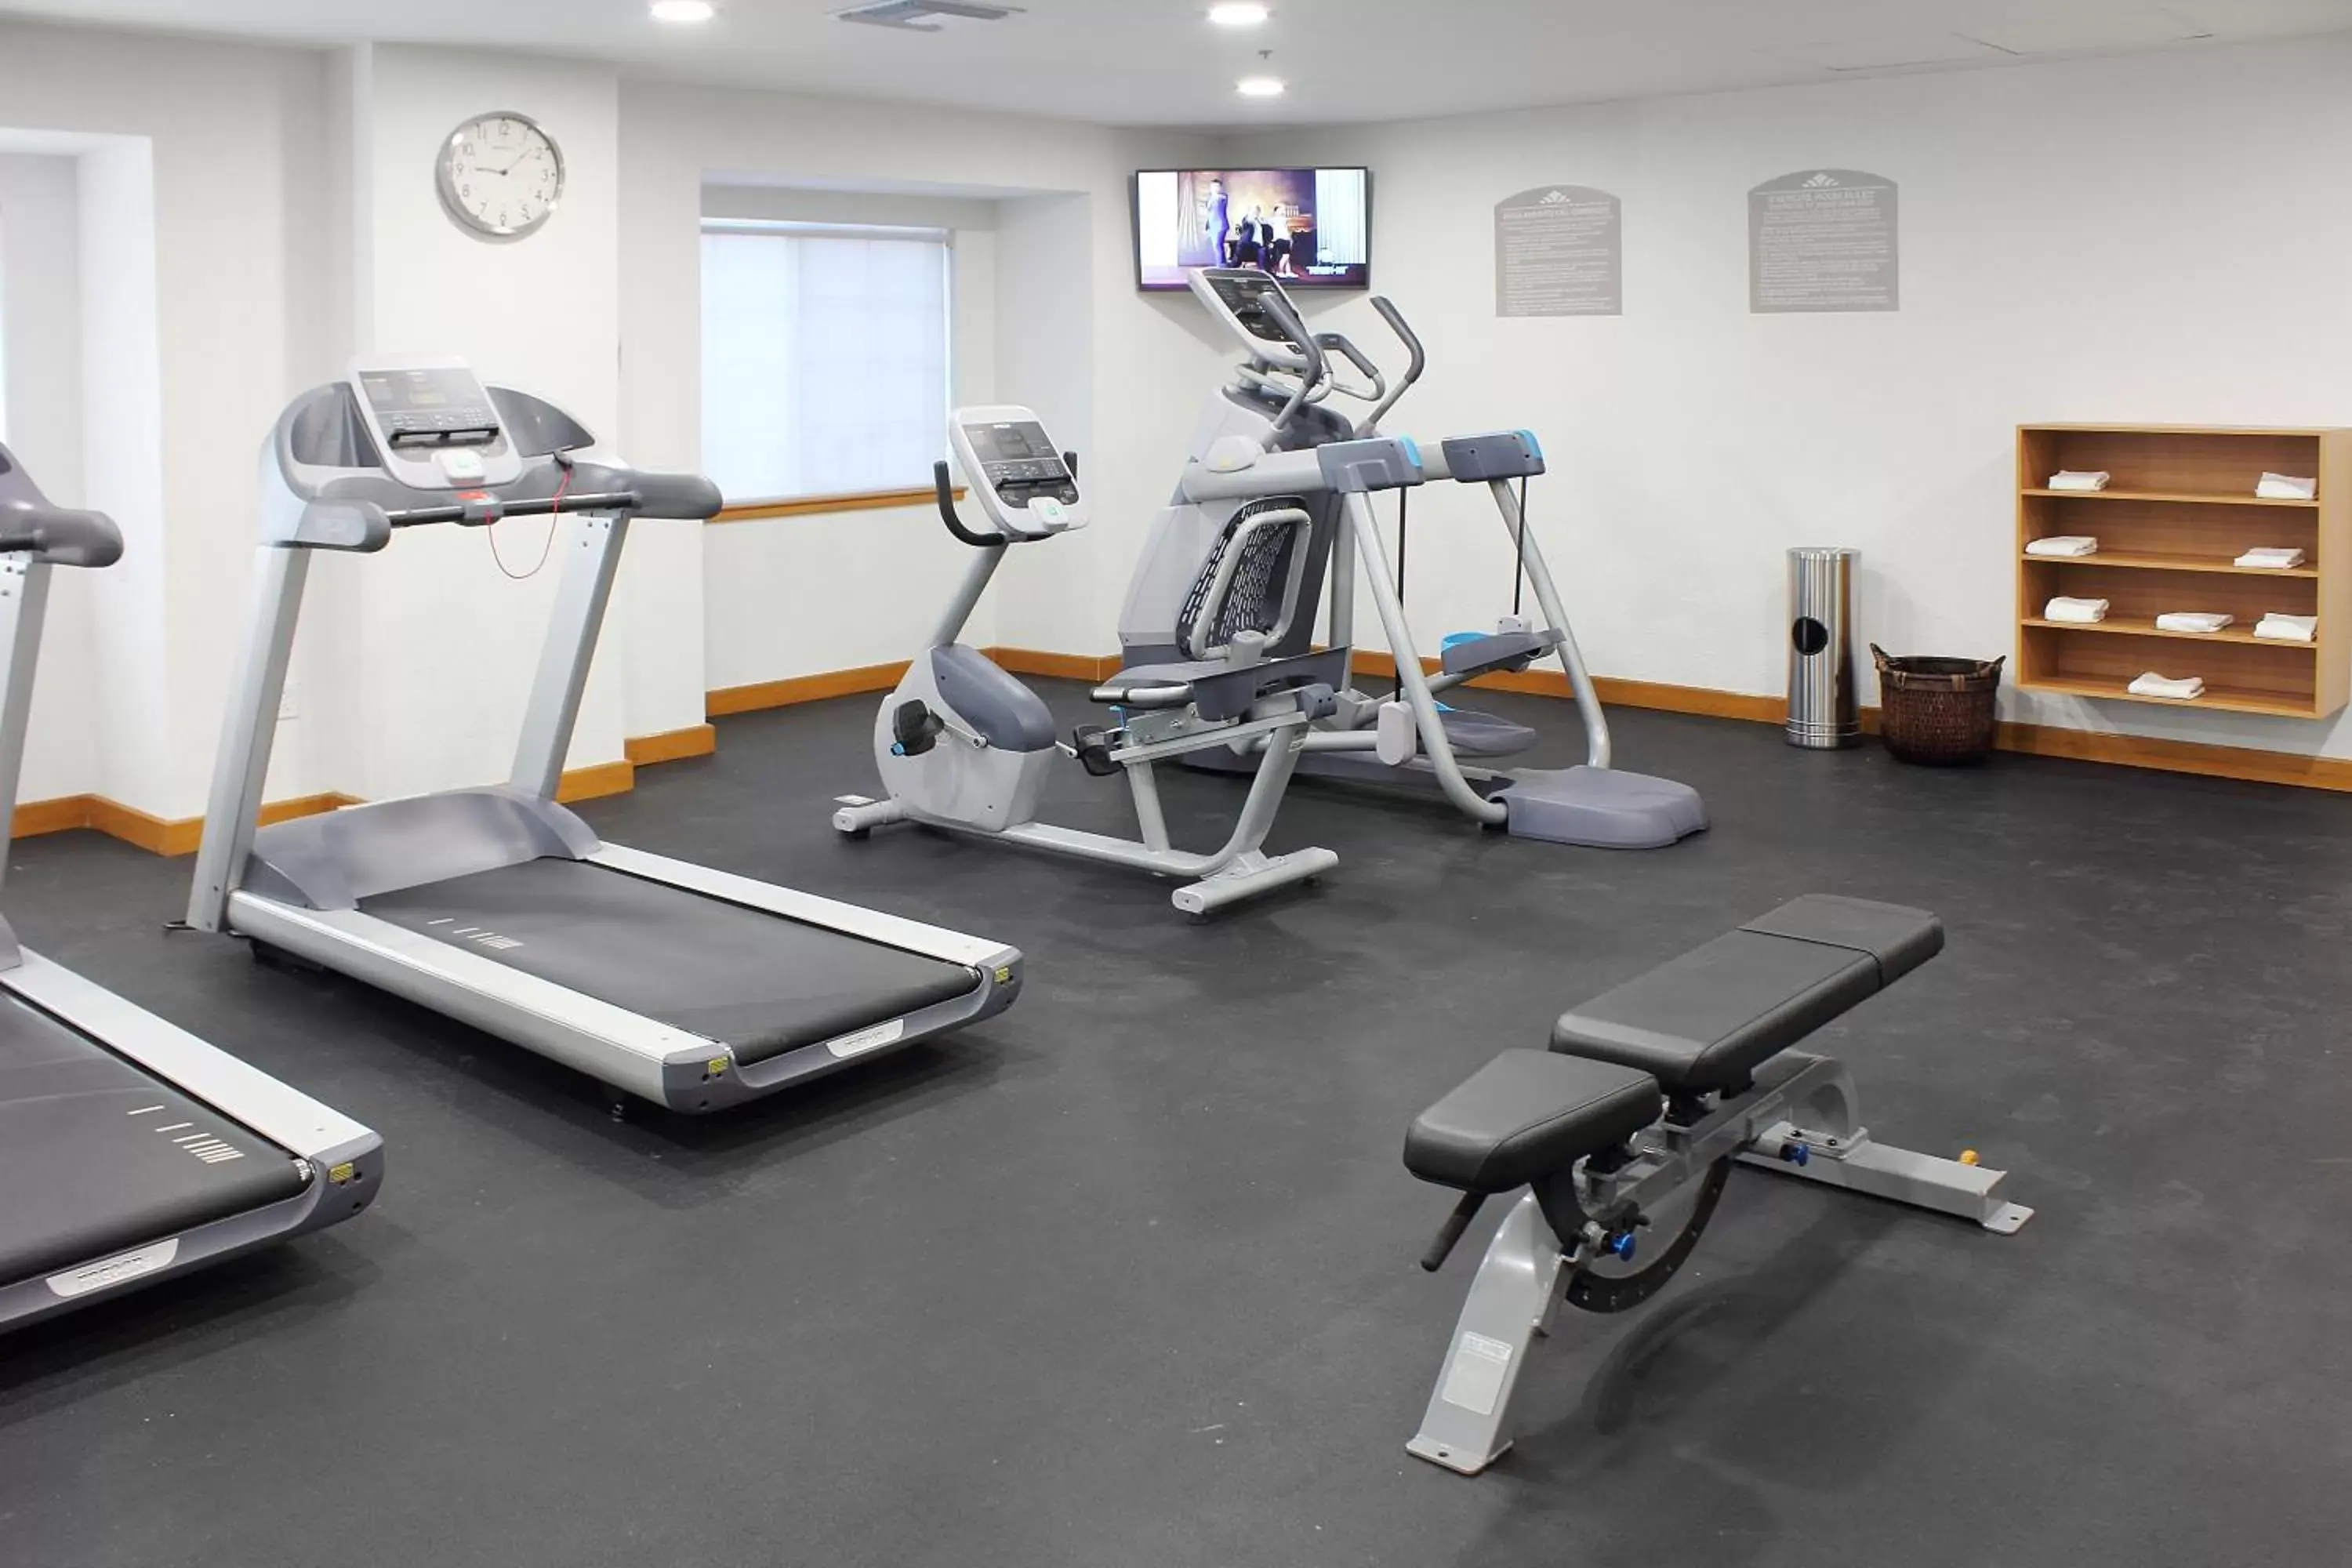 Fitness centre/facilities, Fitness Center/Facilities in Microtel Inn & Suites by Wyndham Culiacán